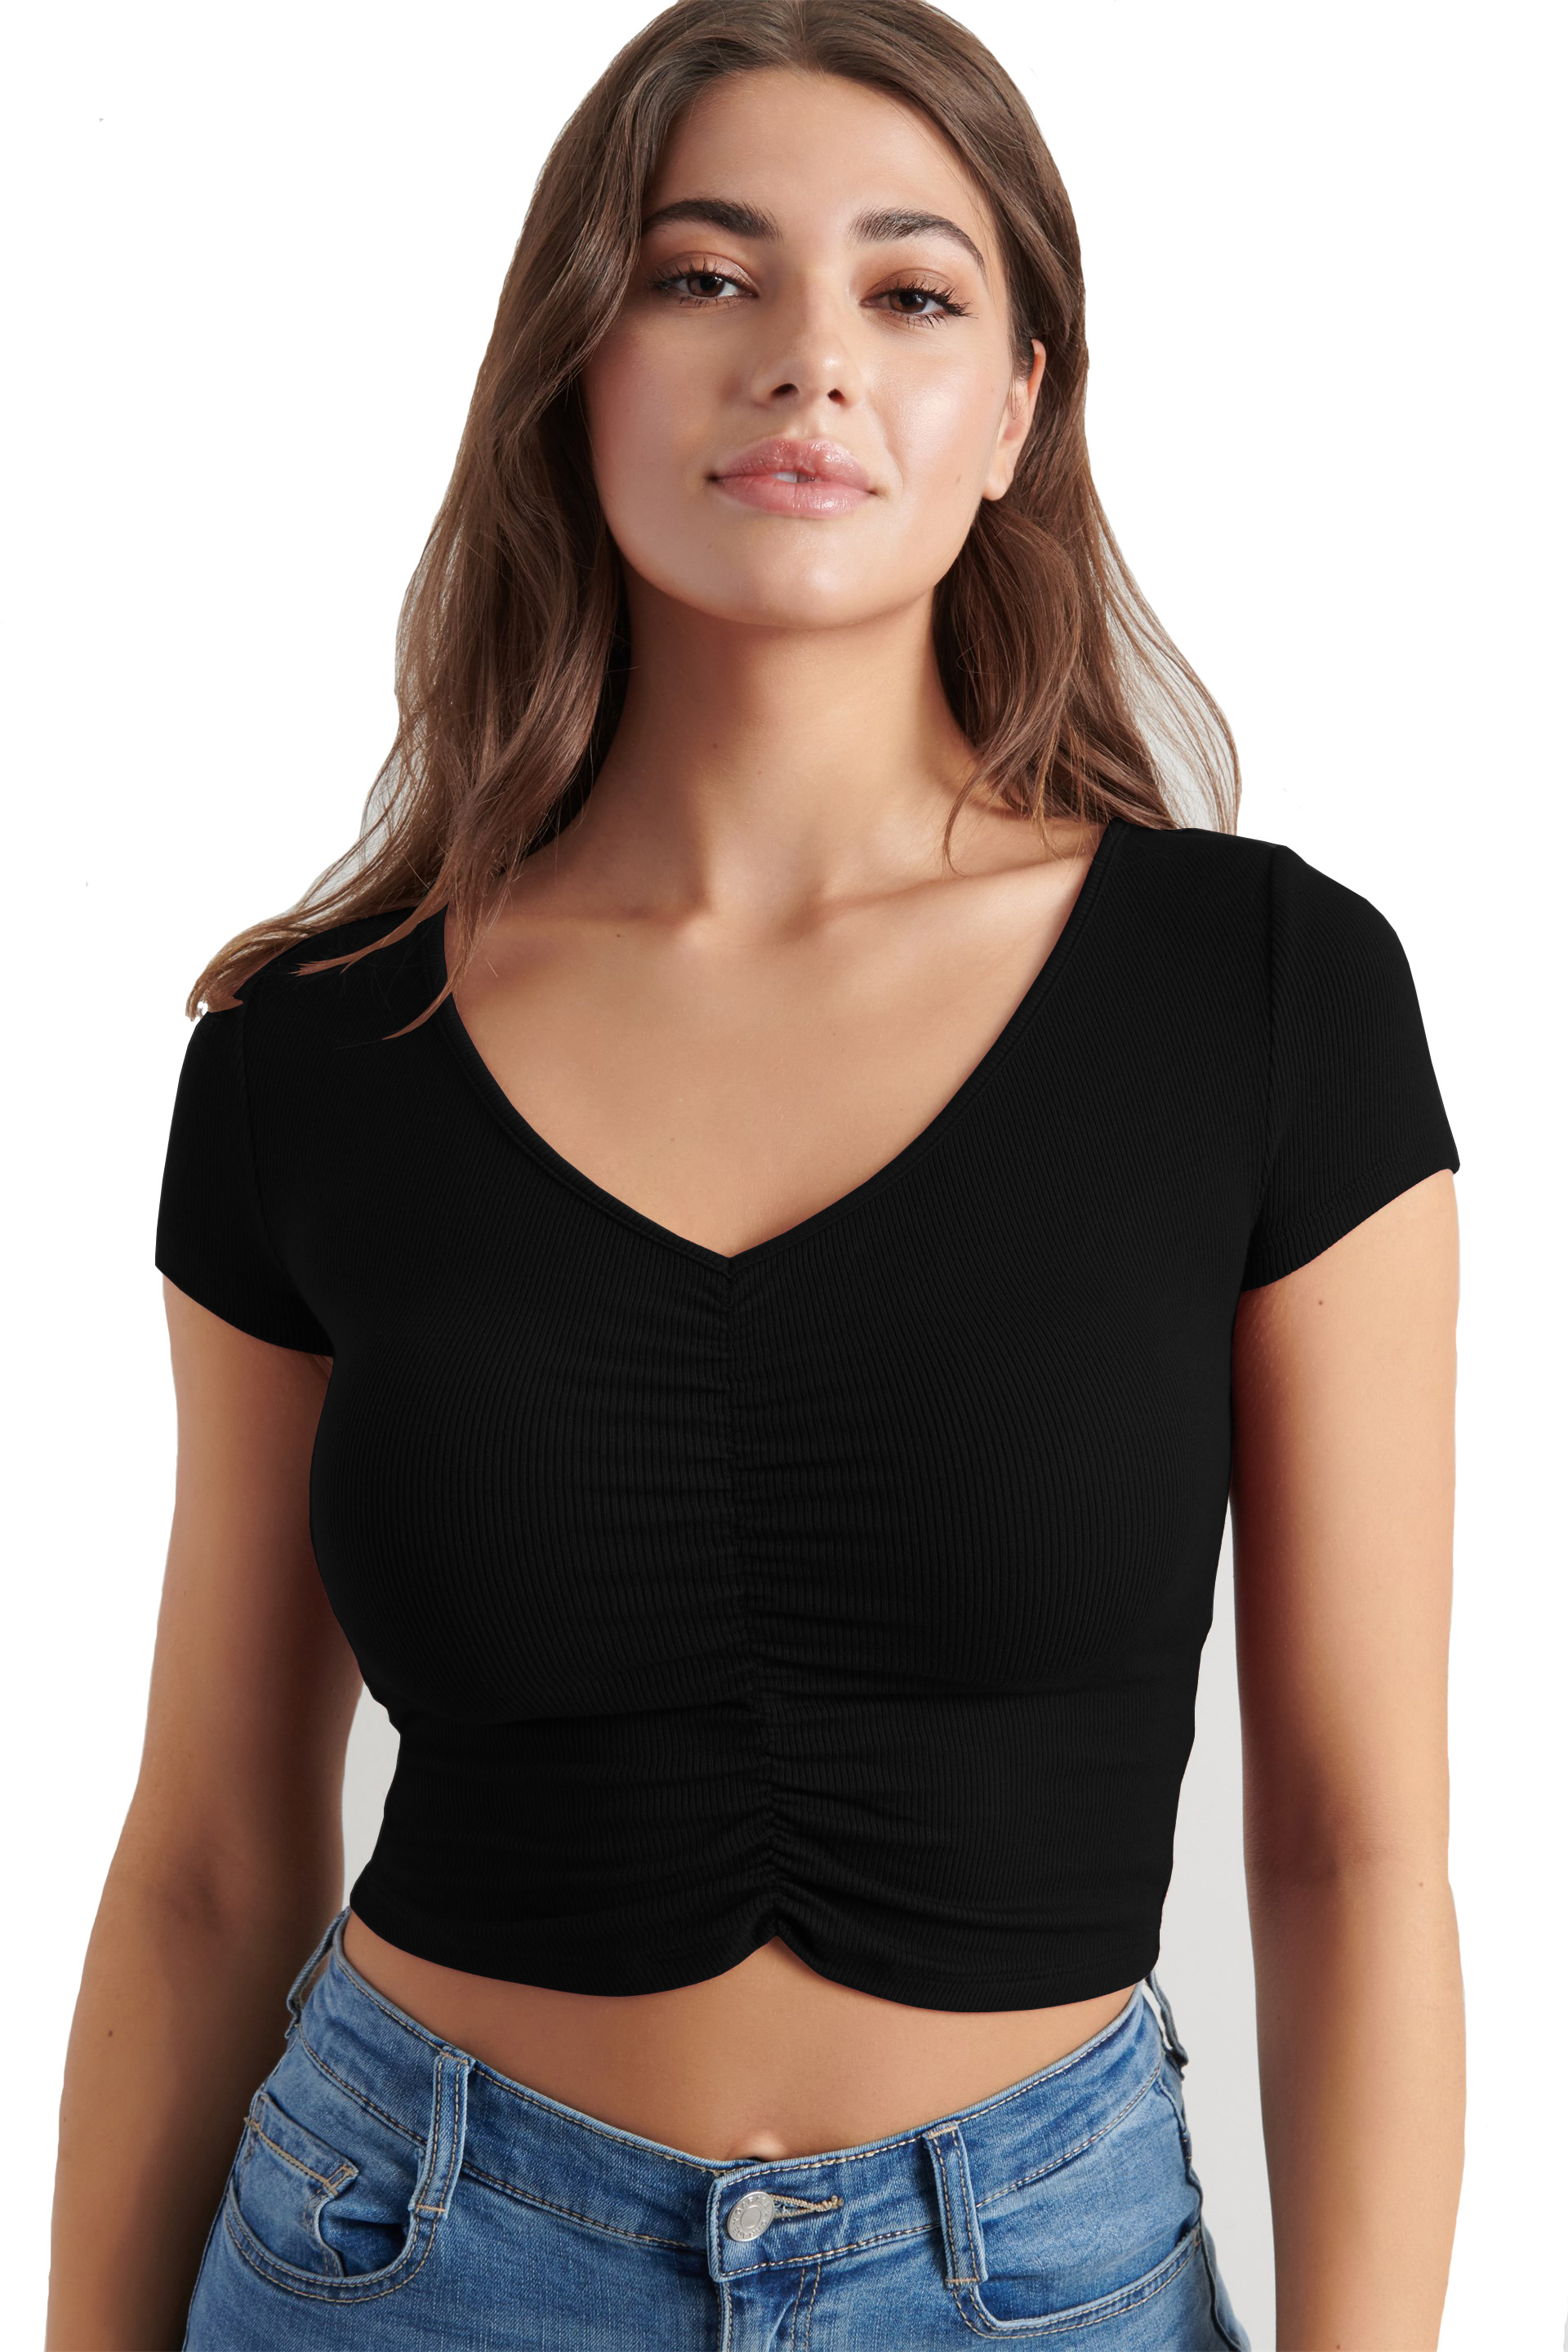 Buy THE BLAZZE 1151 Women's Basic Sexy V Neck Slim Fit Crop Top T-Shirt ...